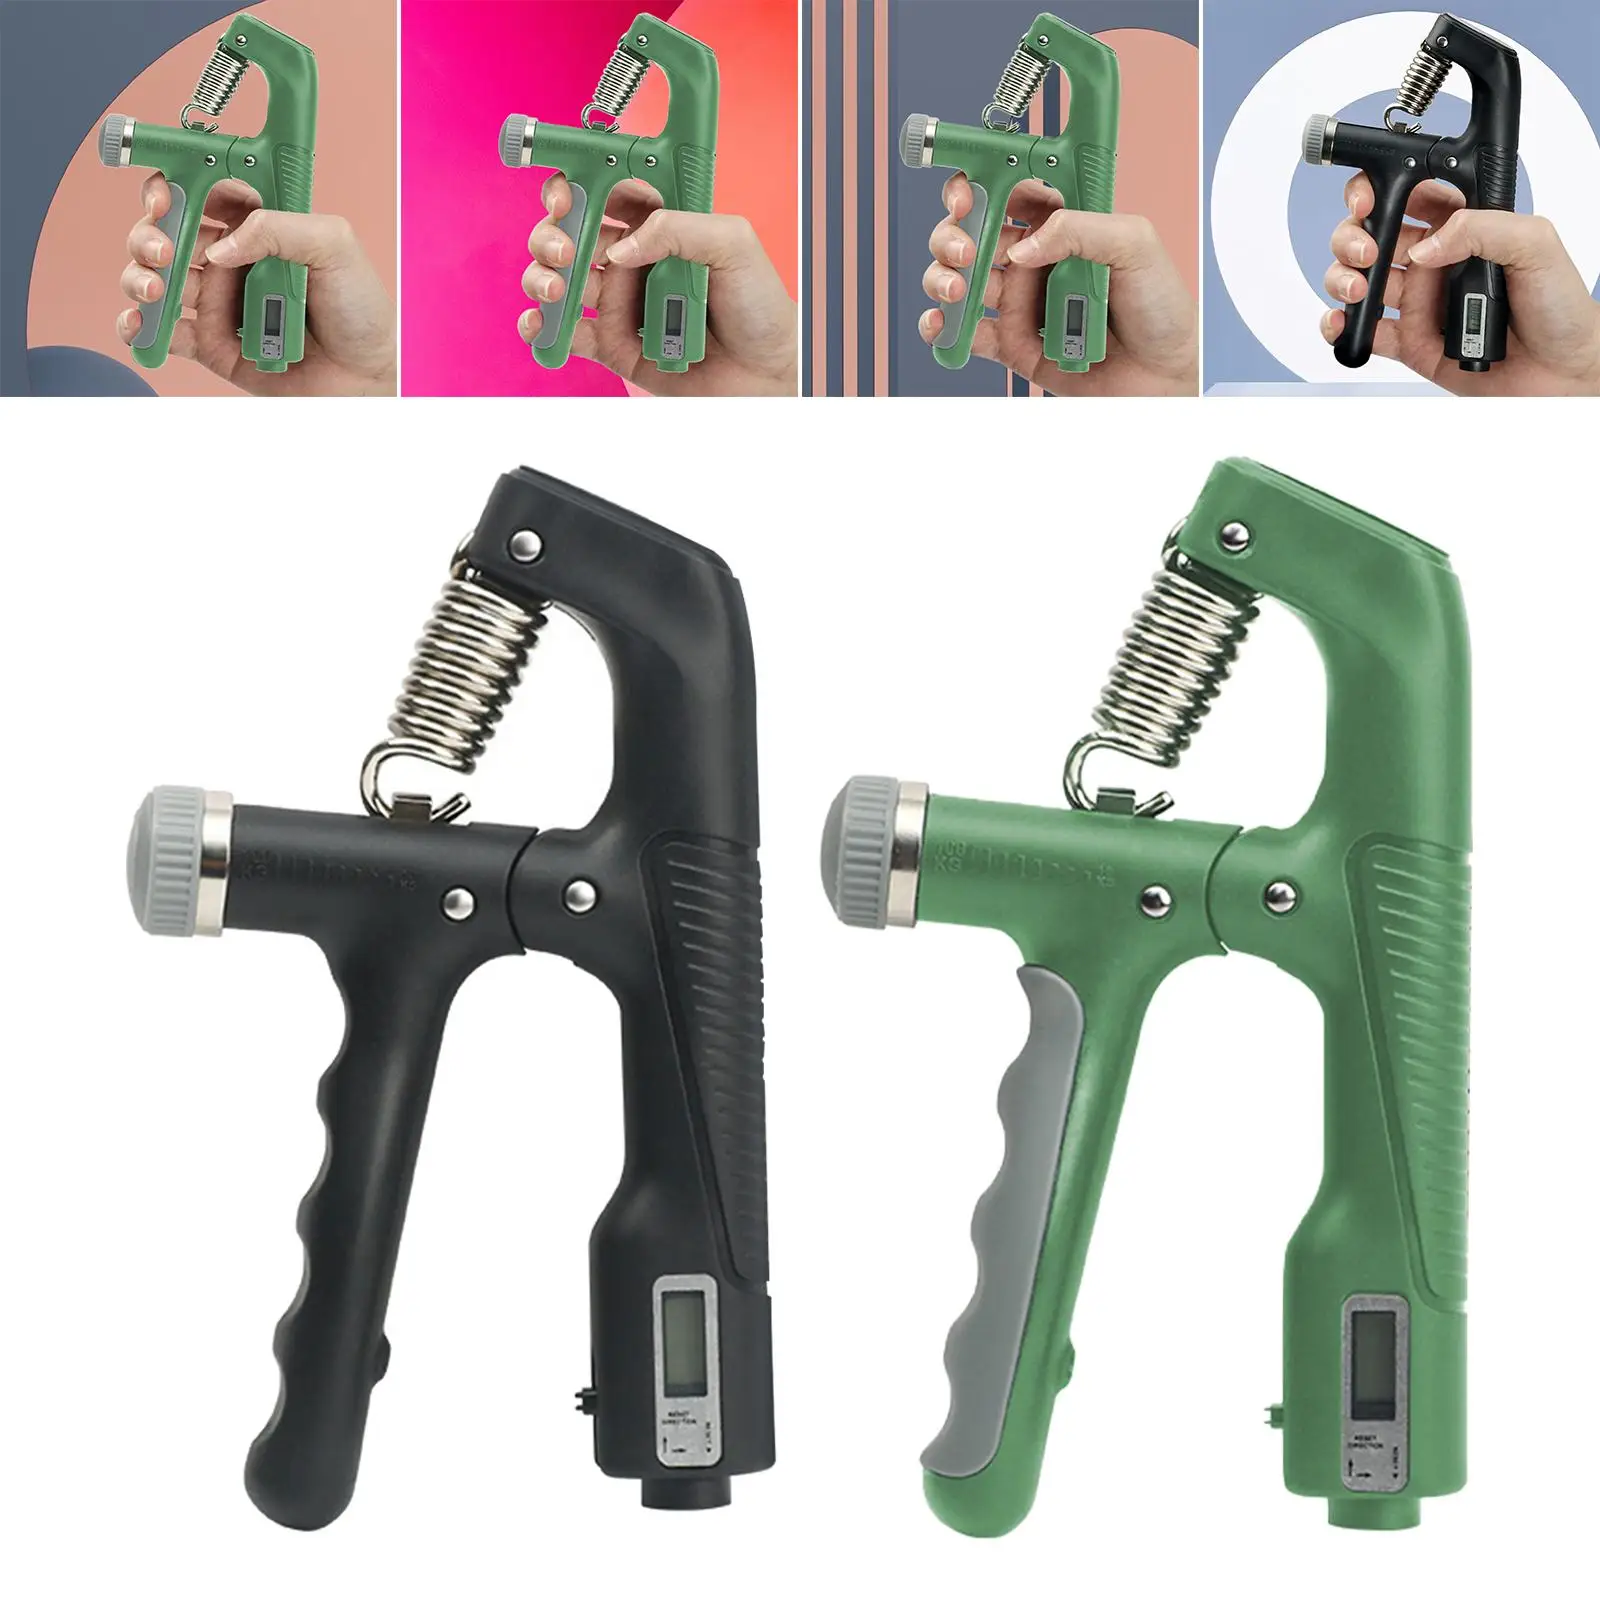 Hand Grip Strengthener Adjustable Resistance Strength Training Forearm Exerciser Countable for Beginners Professionals Home Gym